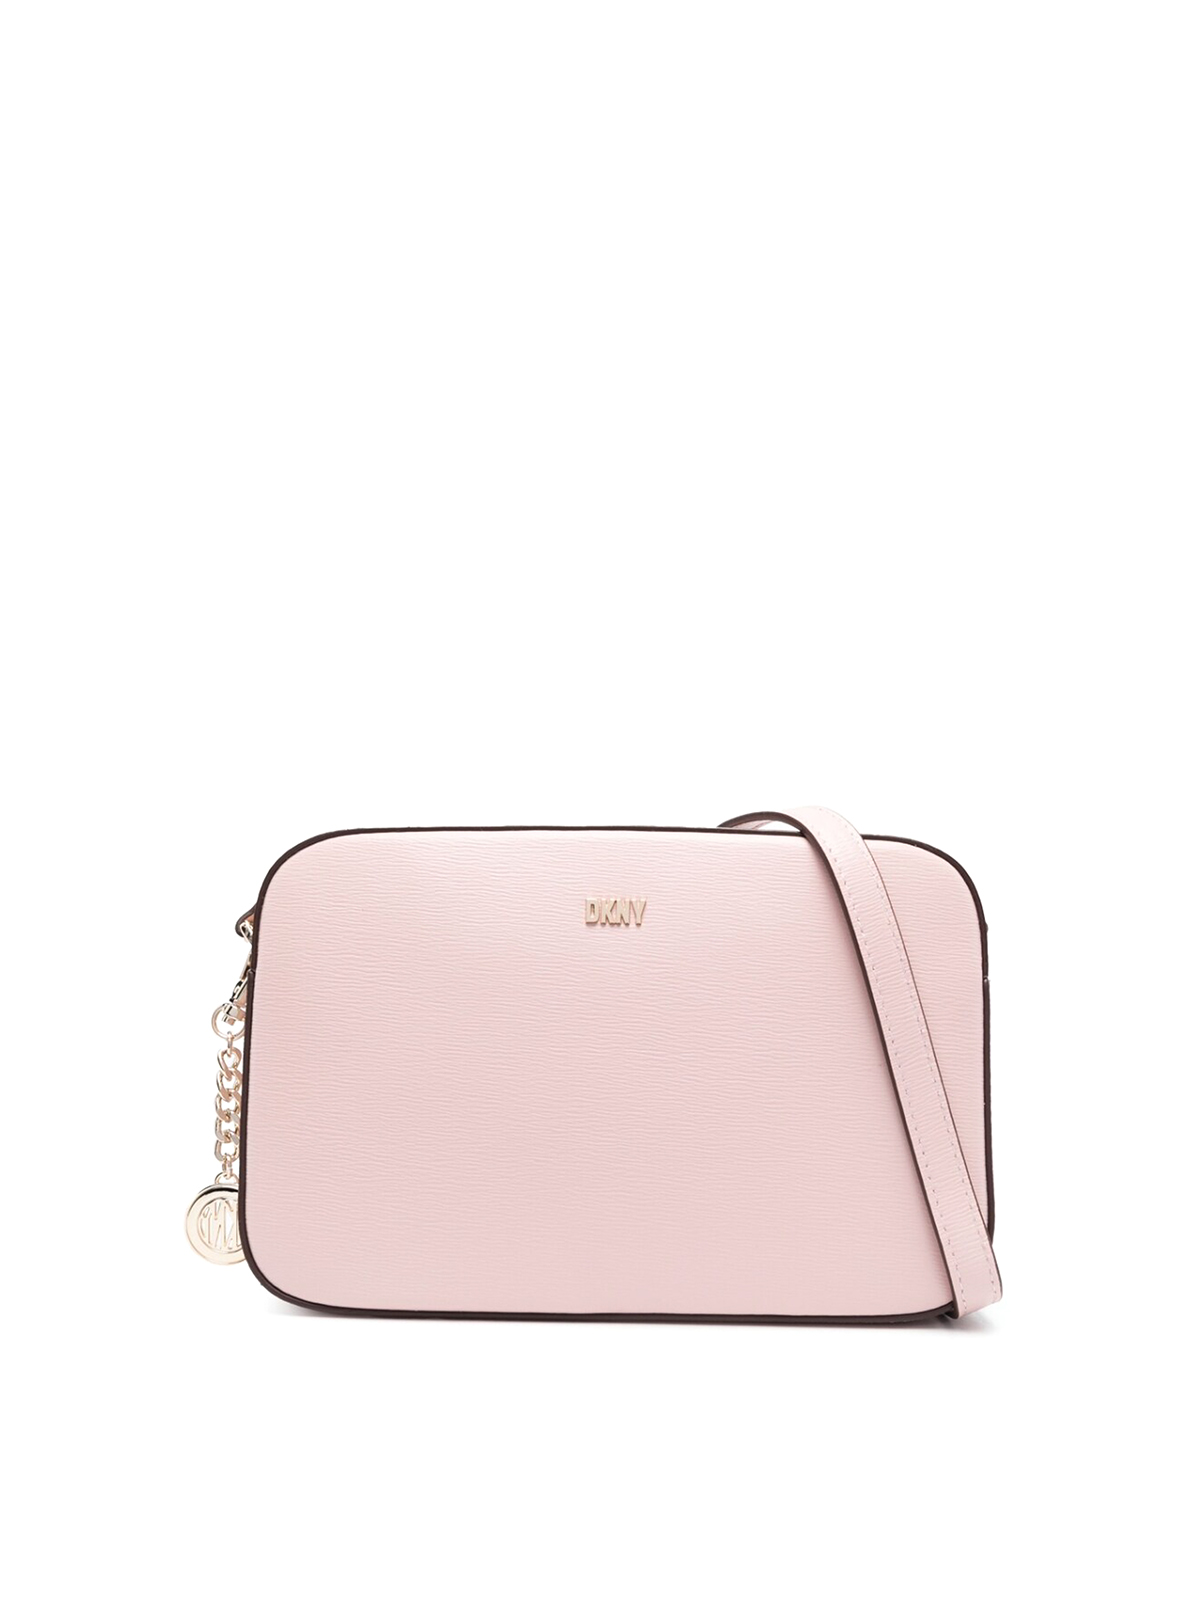 Pink Bryant Leather Crossbody Bag by Dkny in Pink color for Luxury Clothing  | THE LIST